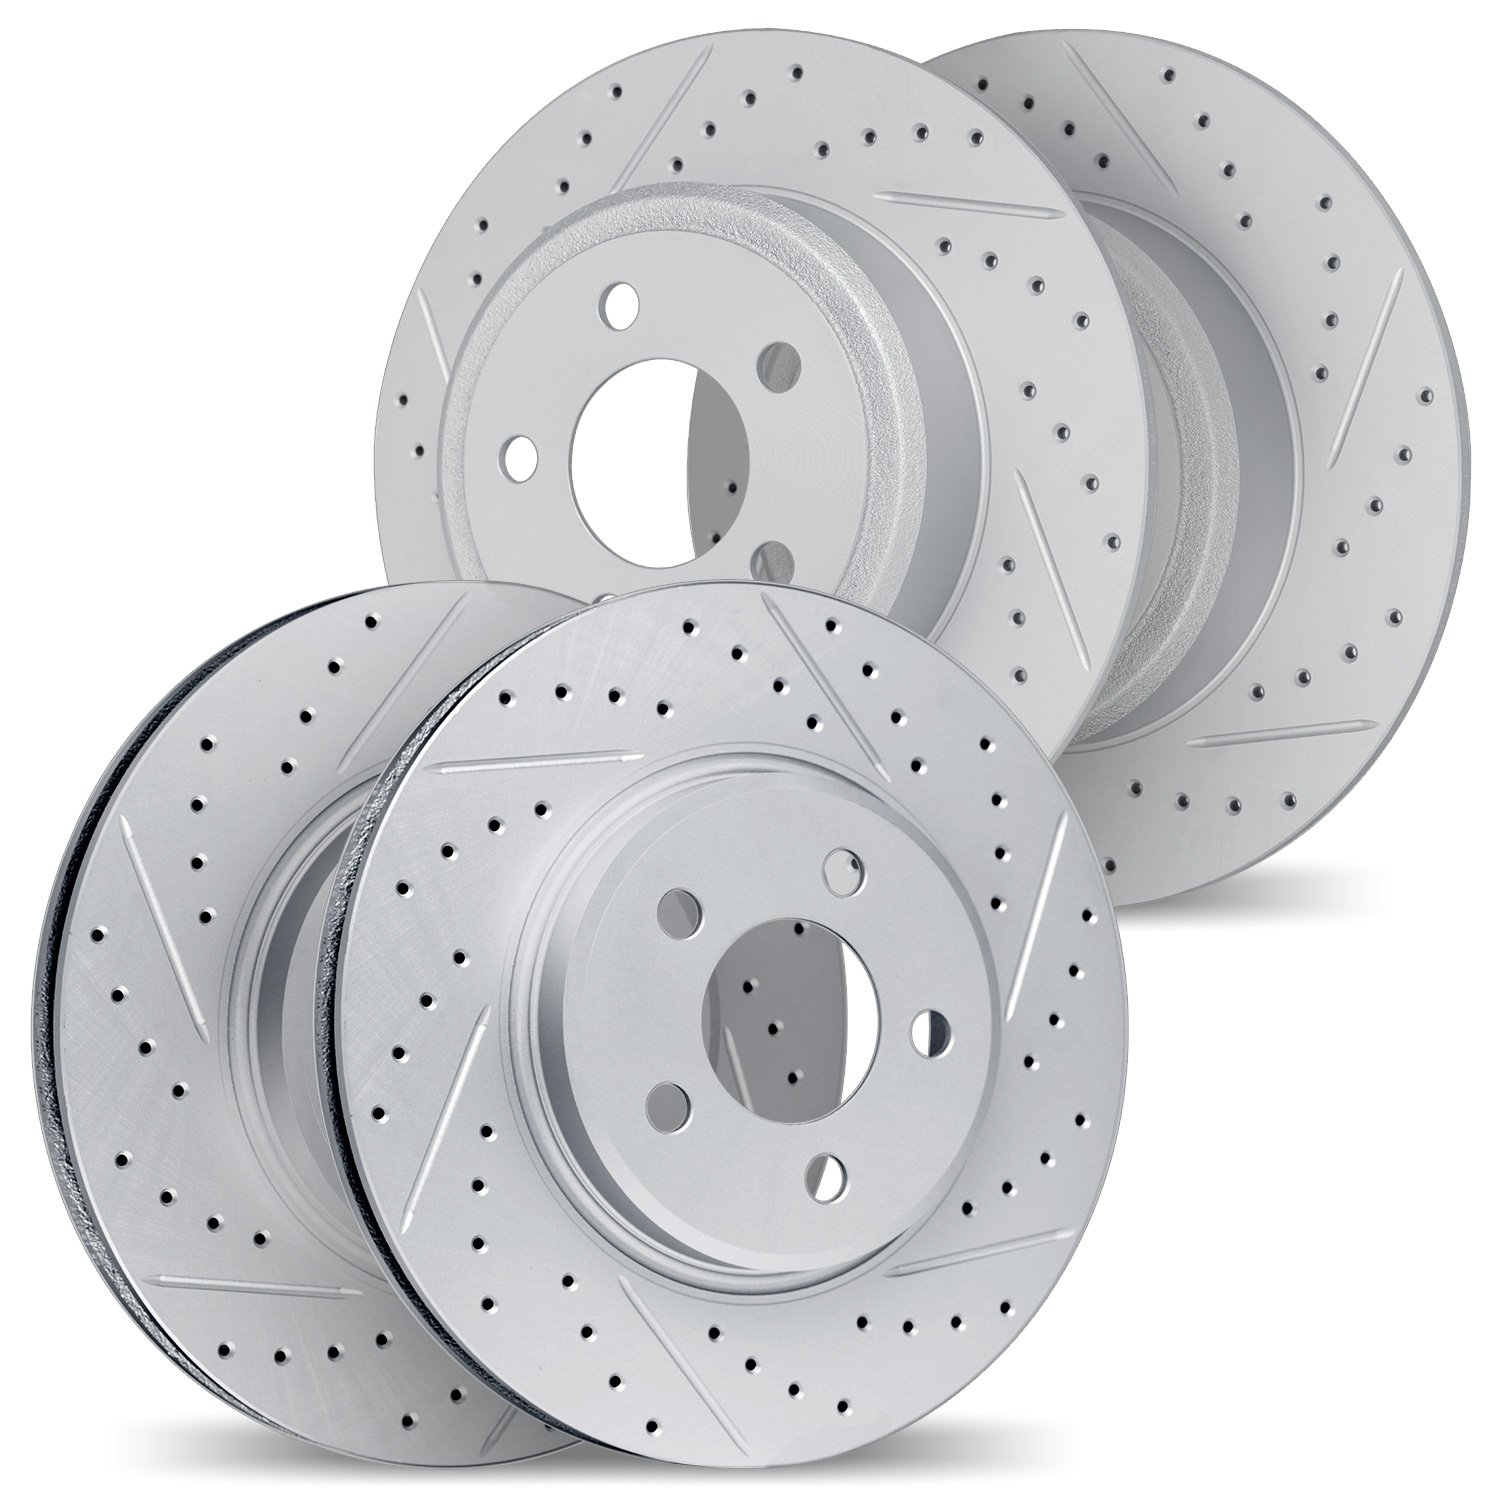 2004-63009 Geoperformance Drilled/Slotted Brake Rotors, 1986-1989 Mercedes-Benz, Position: Front and Rear